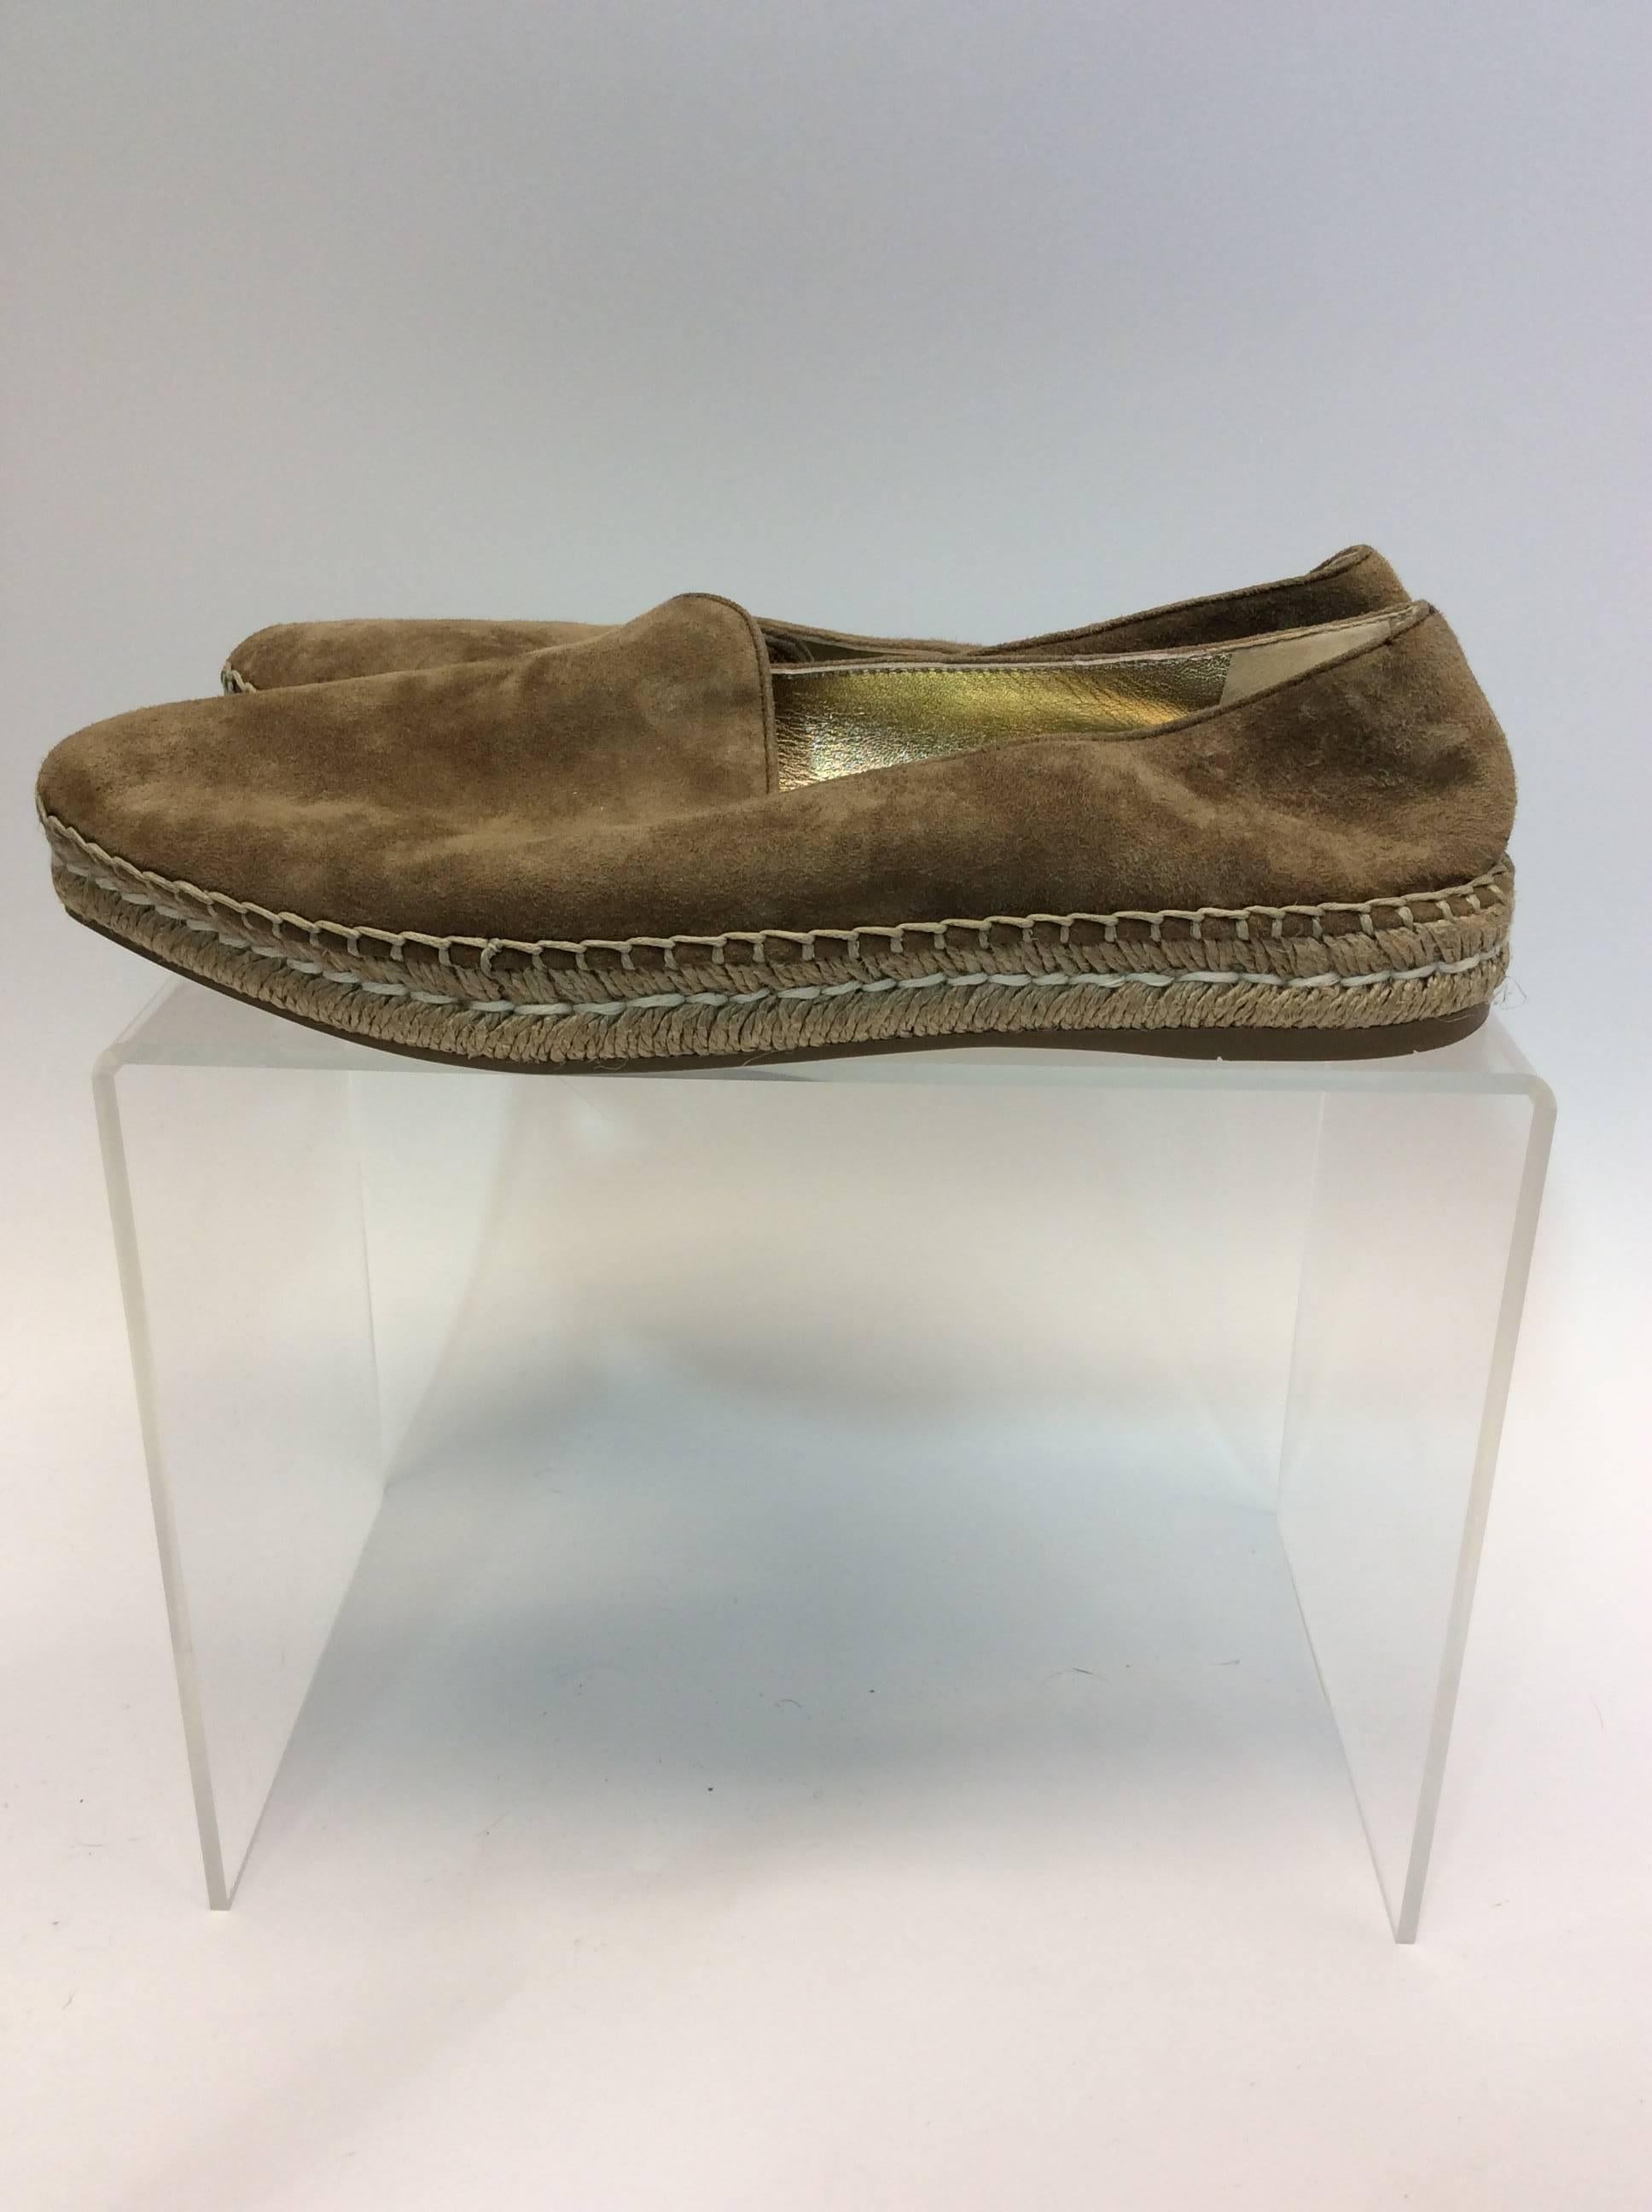 Prada Neutral Suede Espadrilles In Excellent Condition For Sale In Narberth, PA